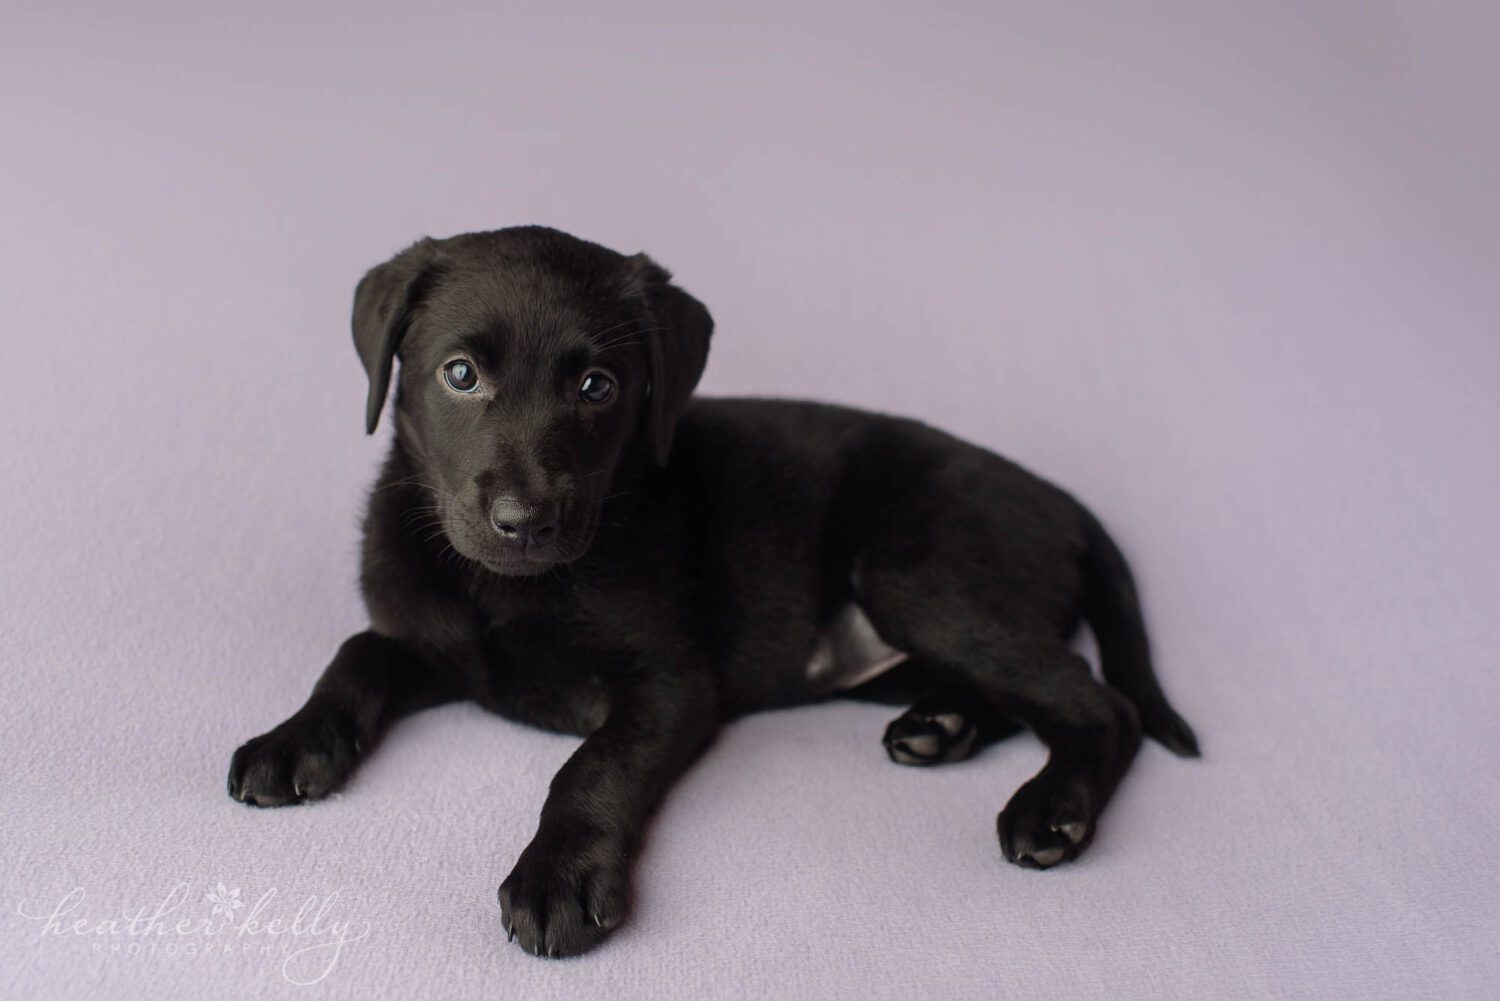 A service dog in training puppy is photographed on a purple blanket. 